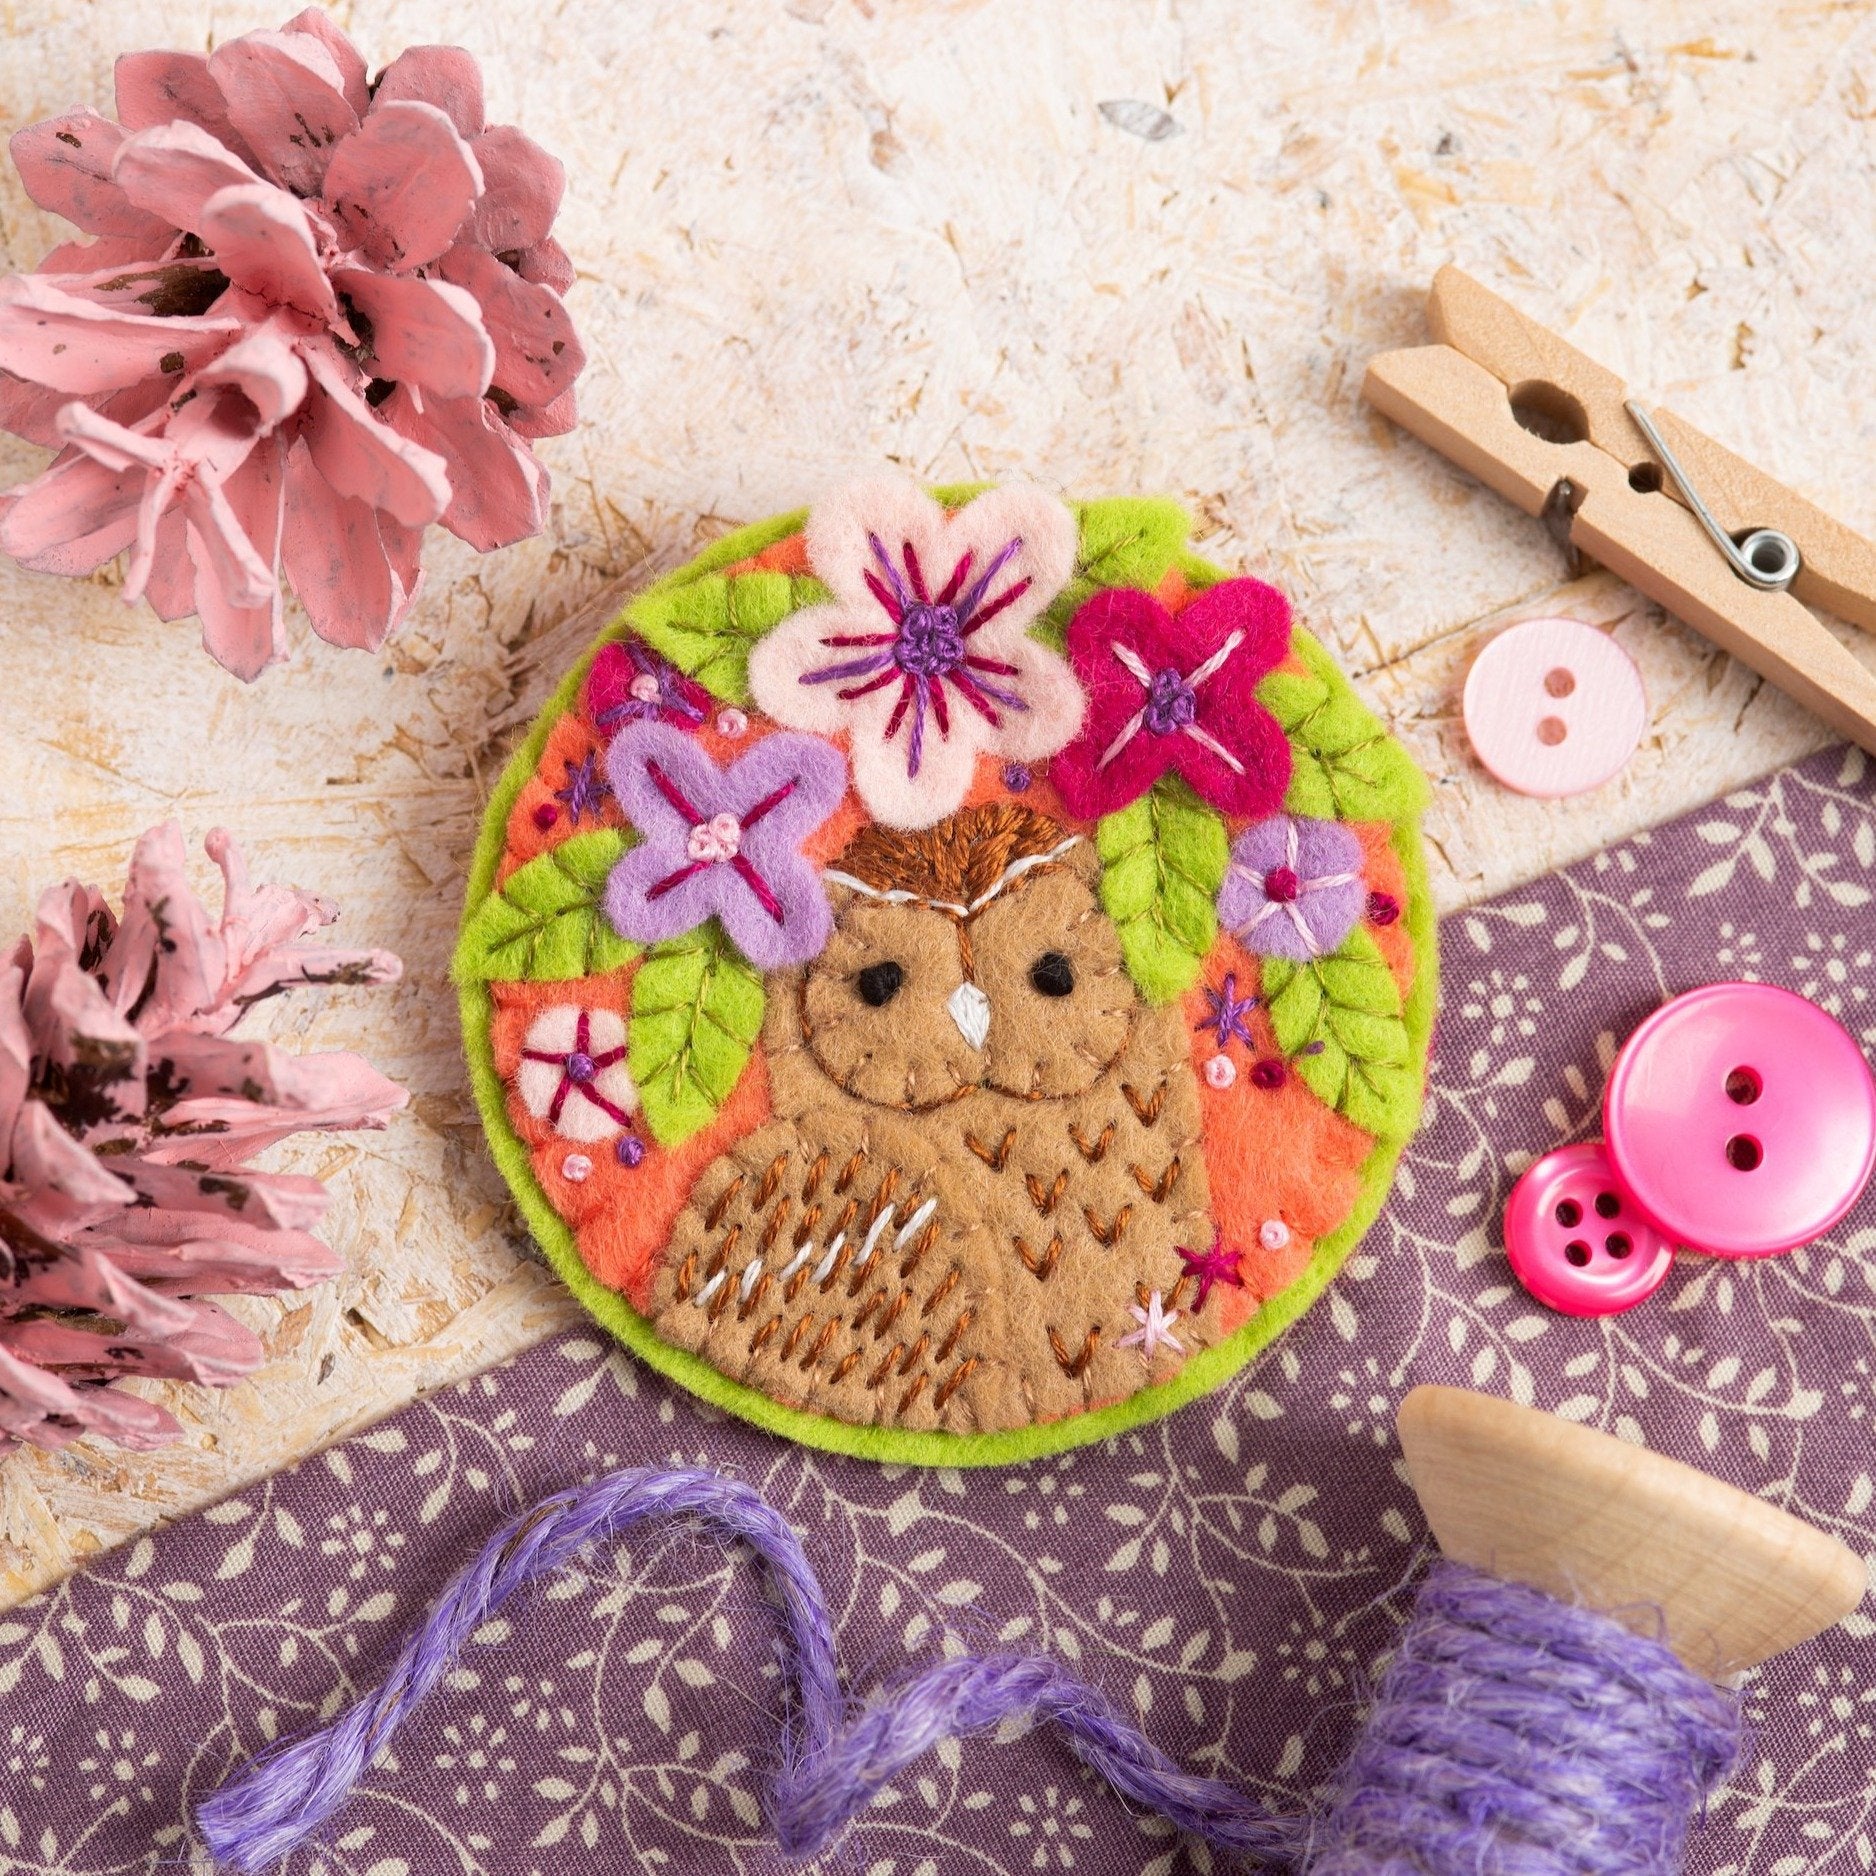 Tawny owl brooch on wooden background with purple fabric, wooden pegs and pink painted pine cones used as props.